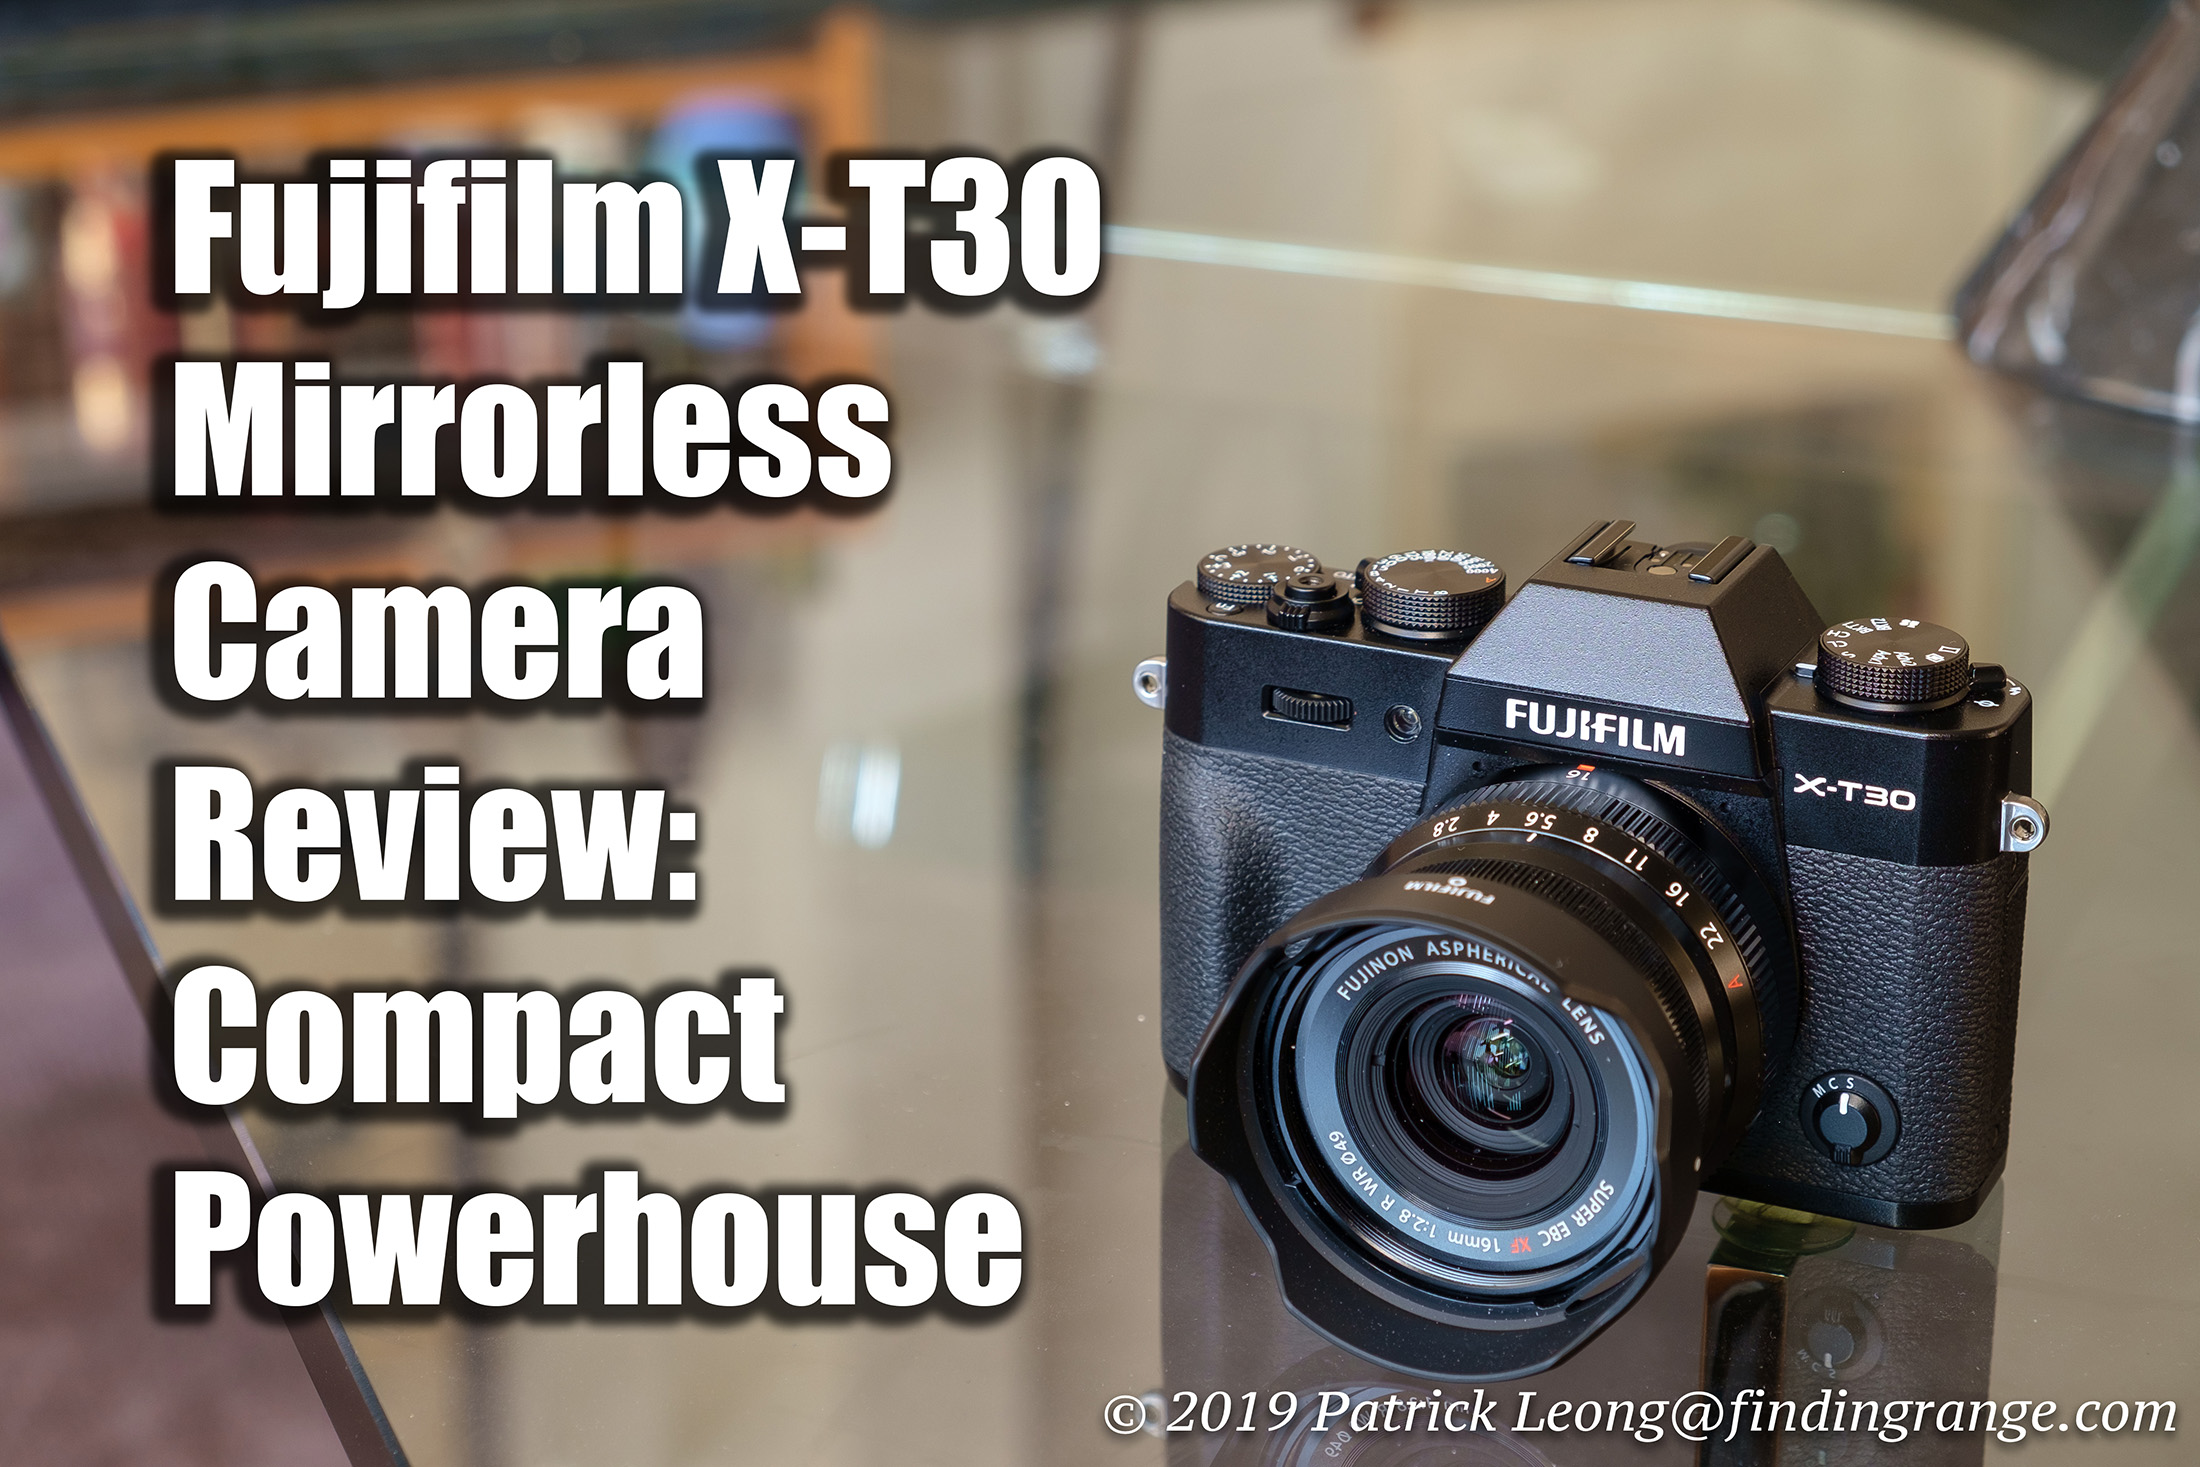 FUJIFILM X-T30 Mirrorless Camera with 35mm f/2 Lens and